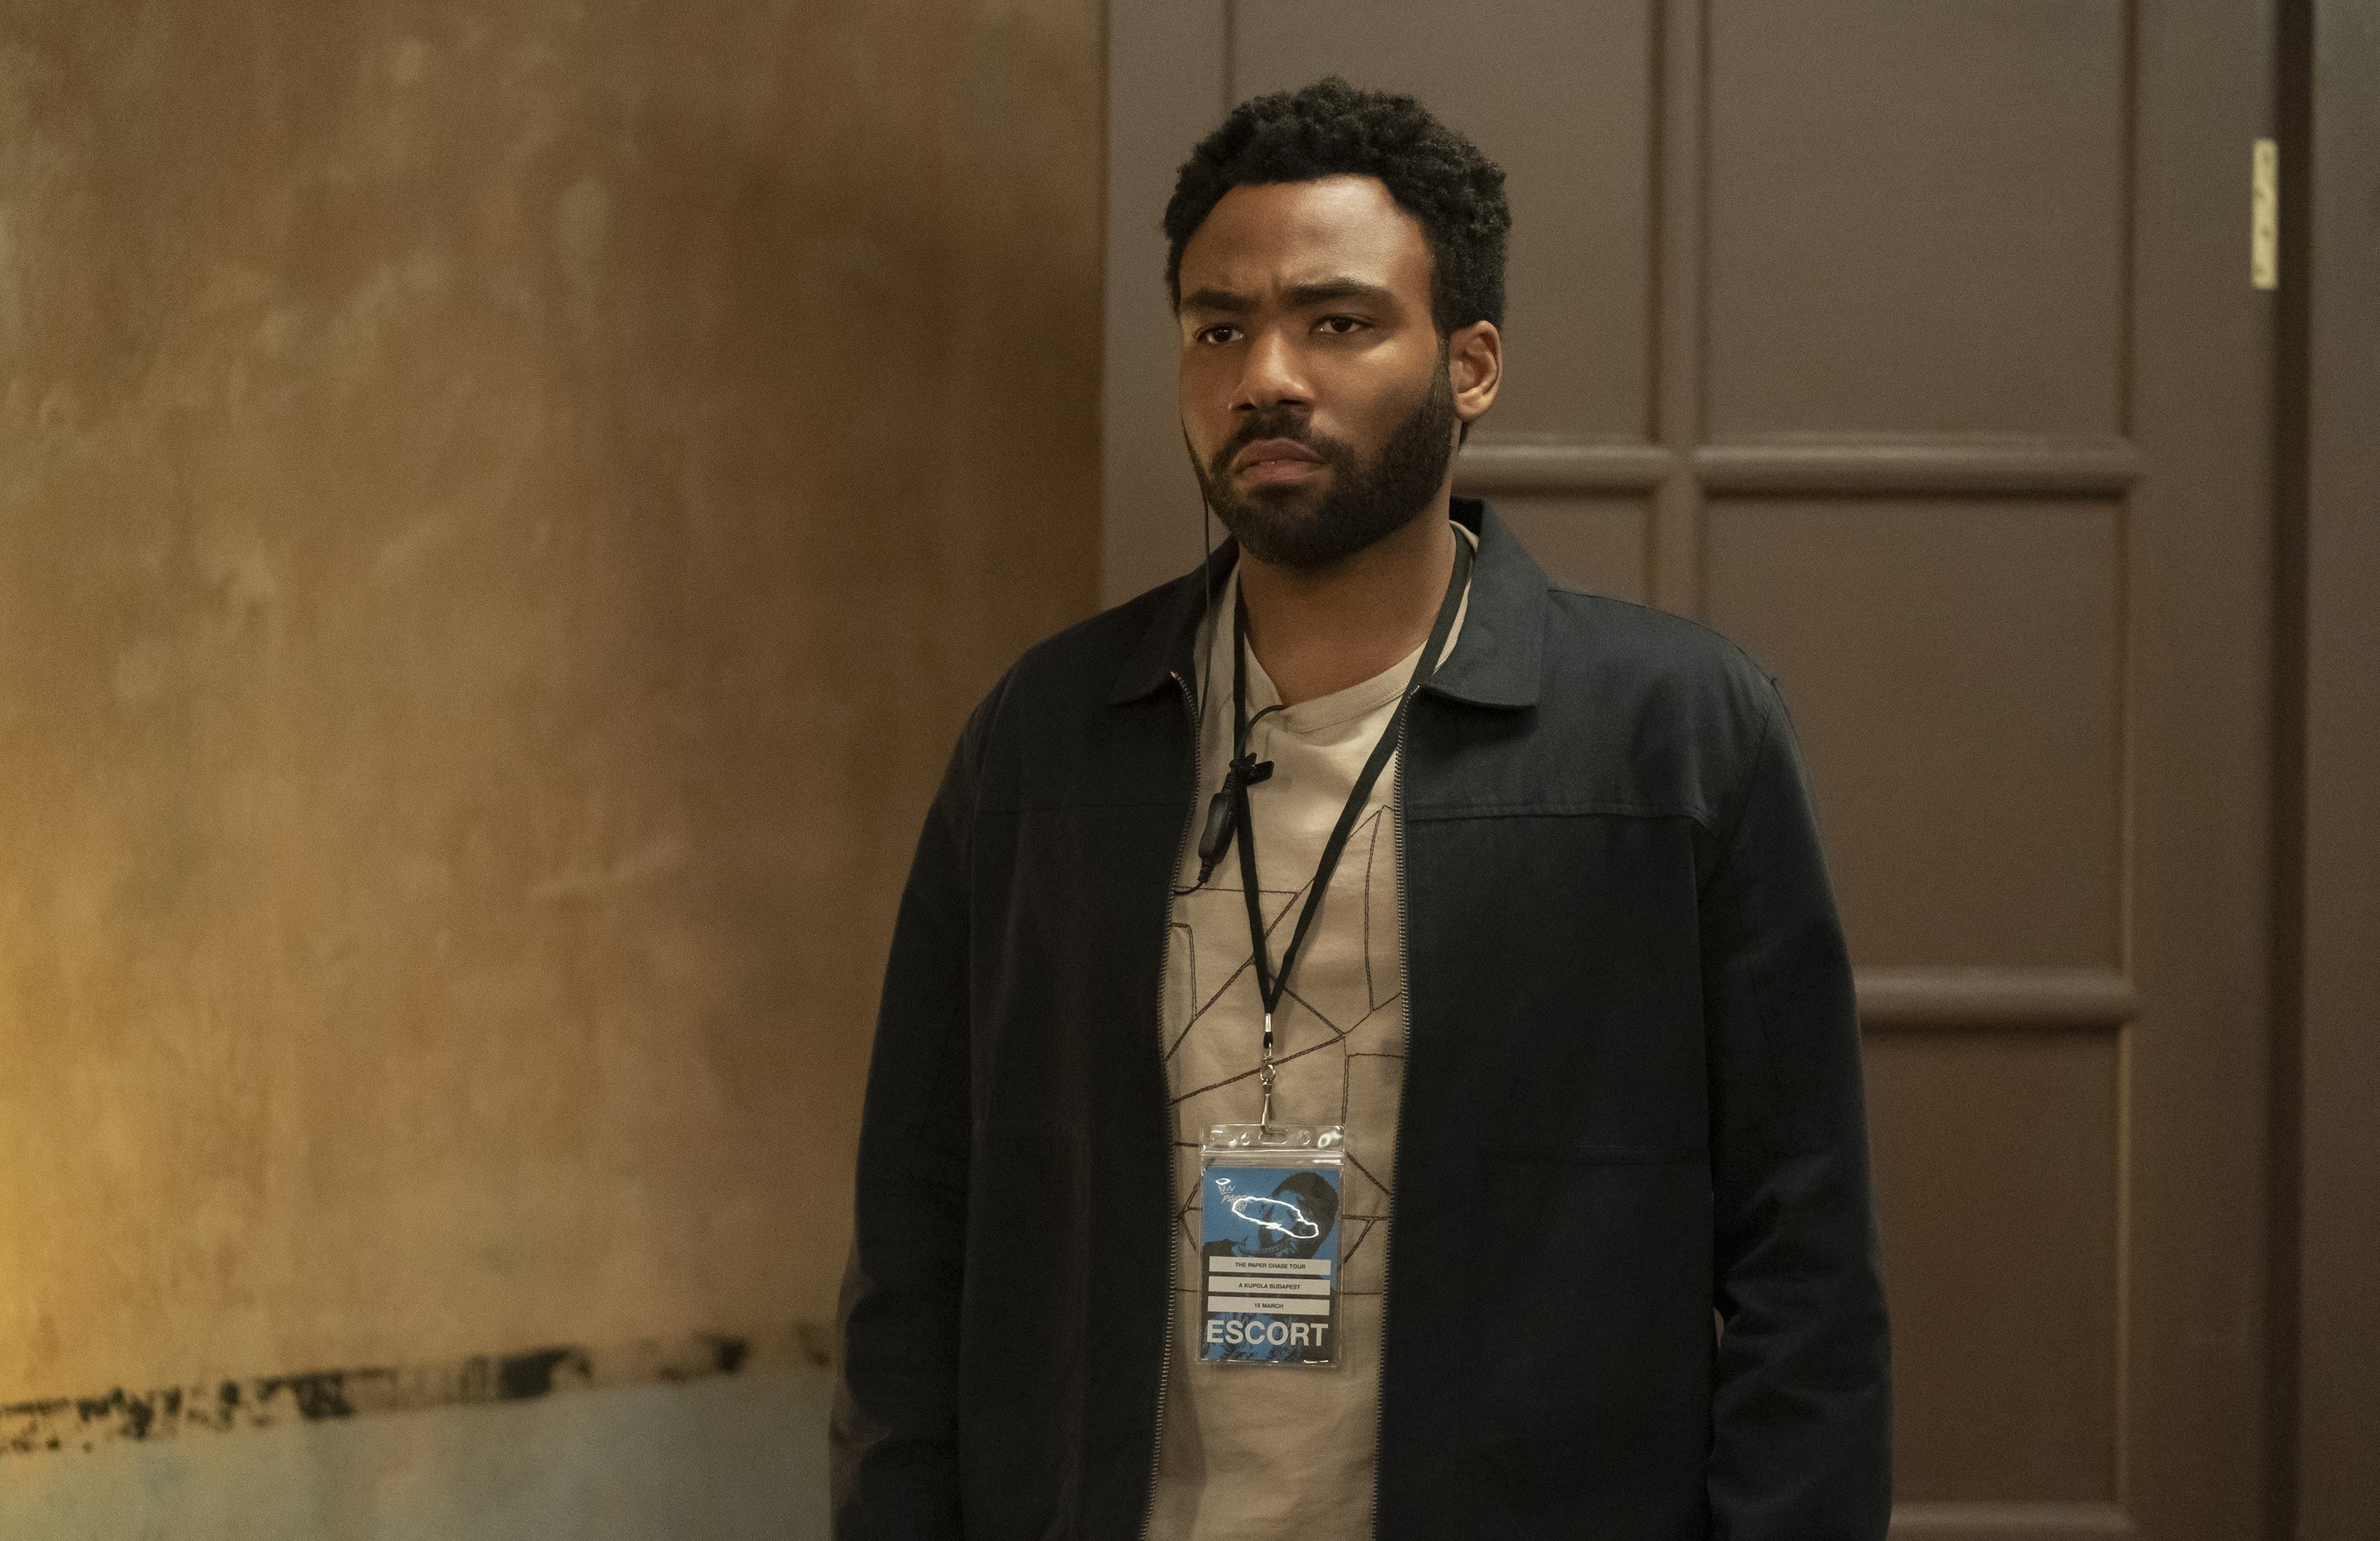 Donald Glover looking serious in a scene from the show